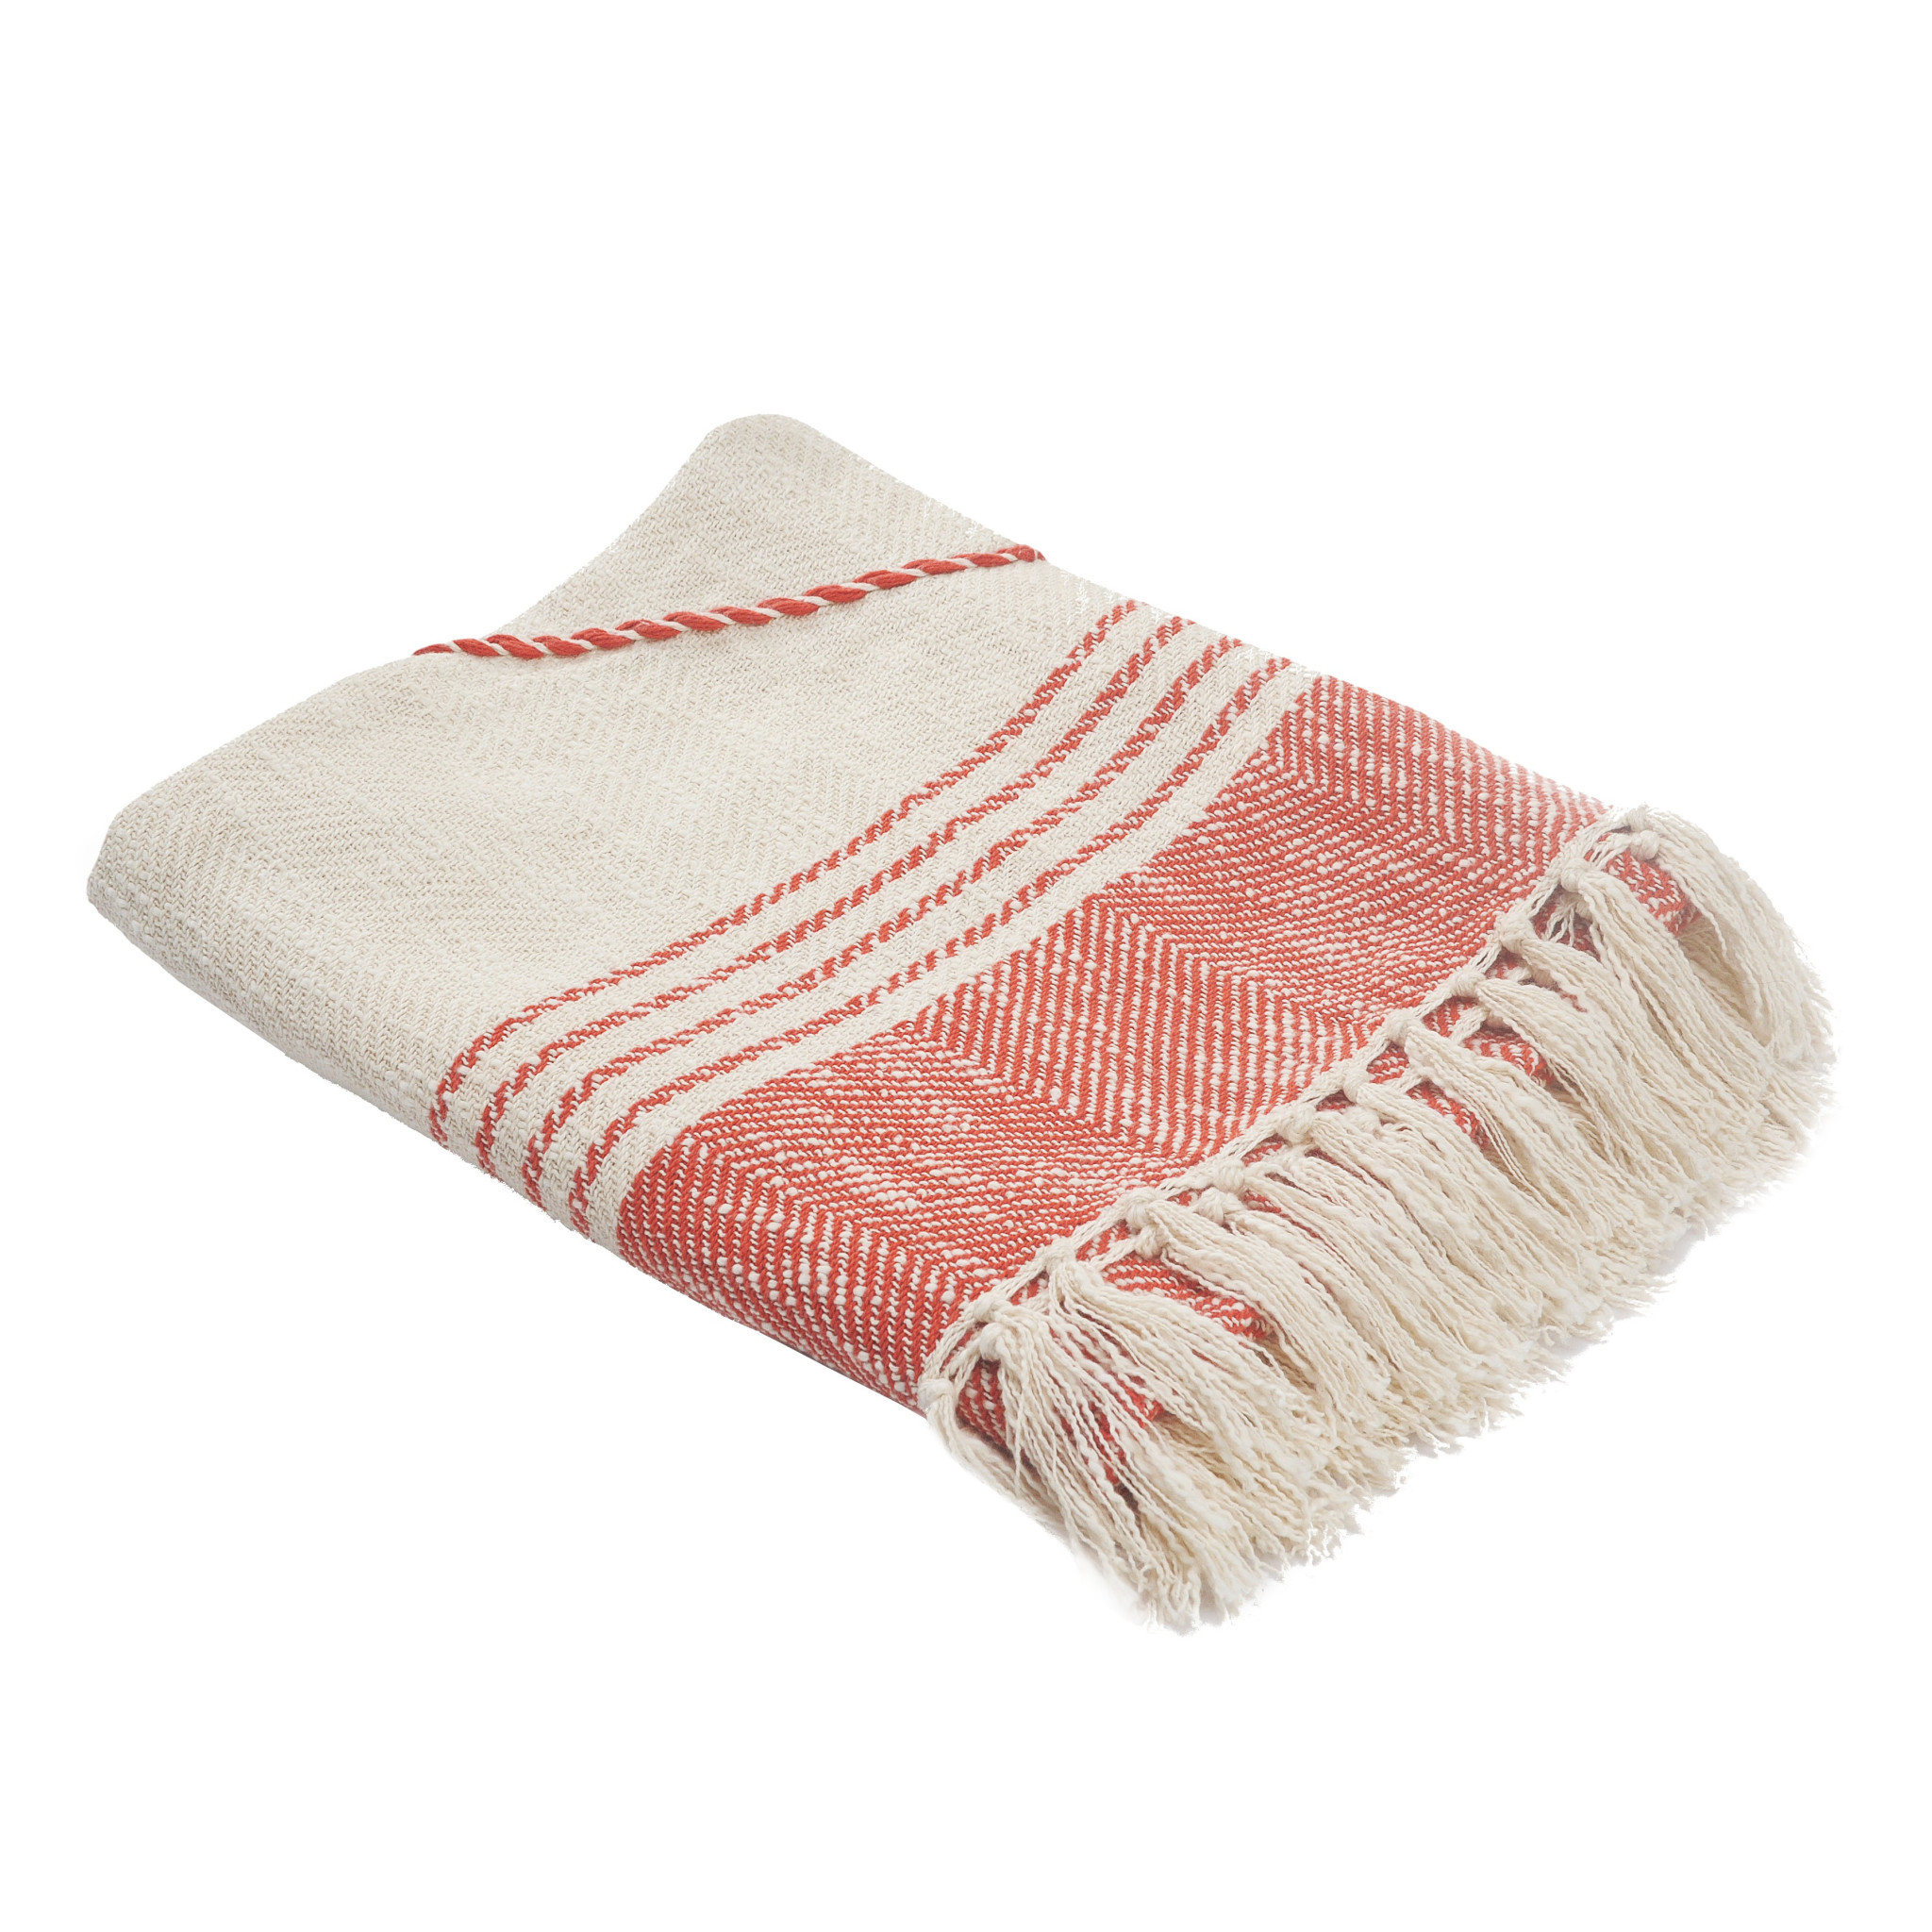 Red Woven Cotton Striped Throw Blanket-516481-1